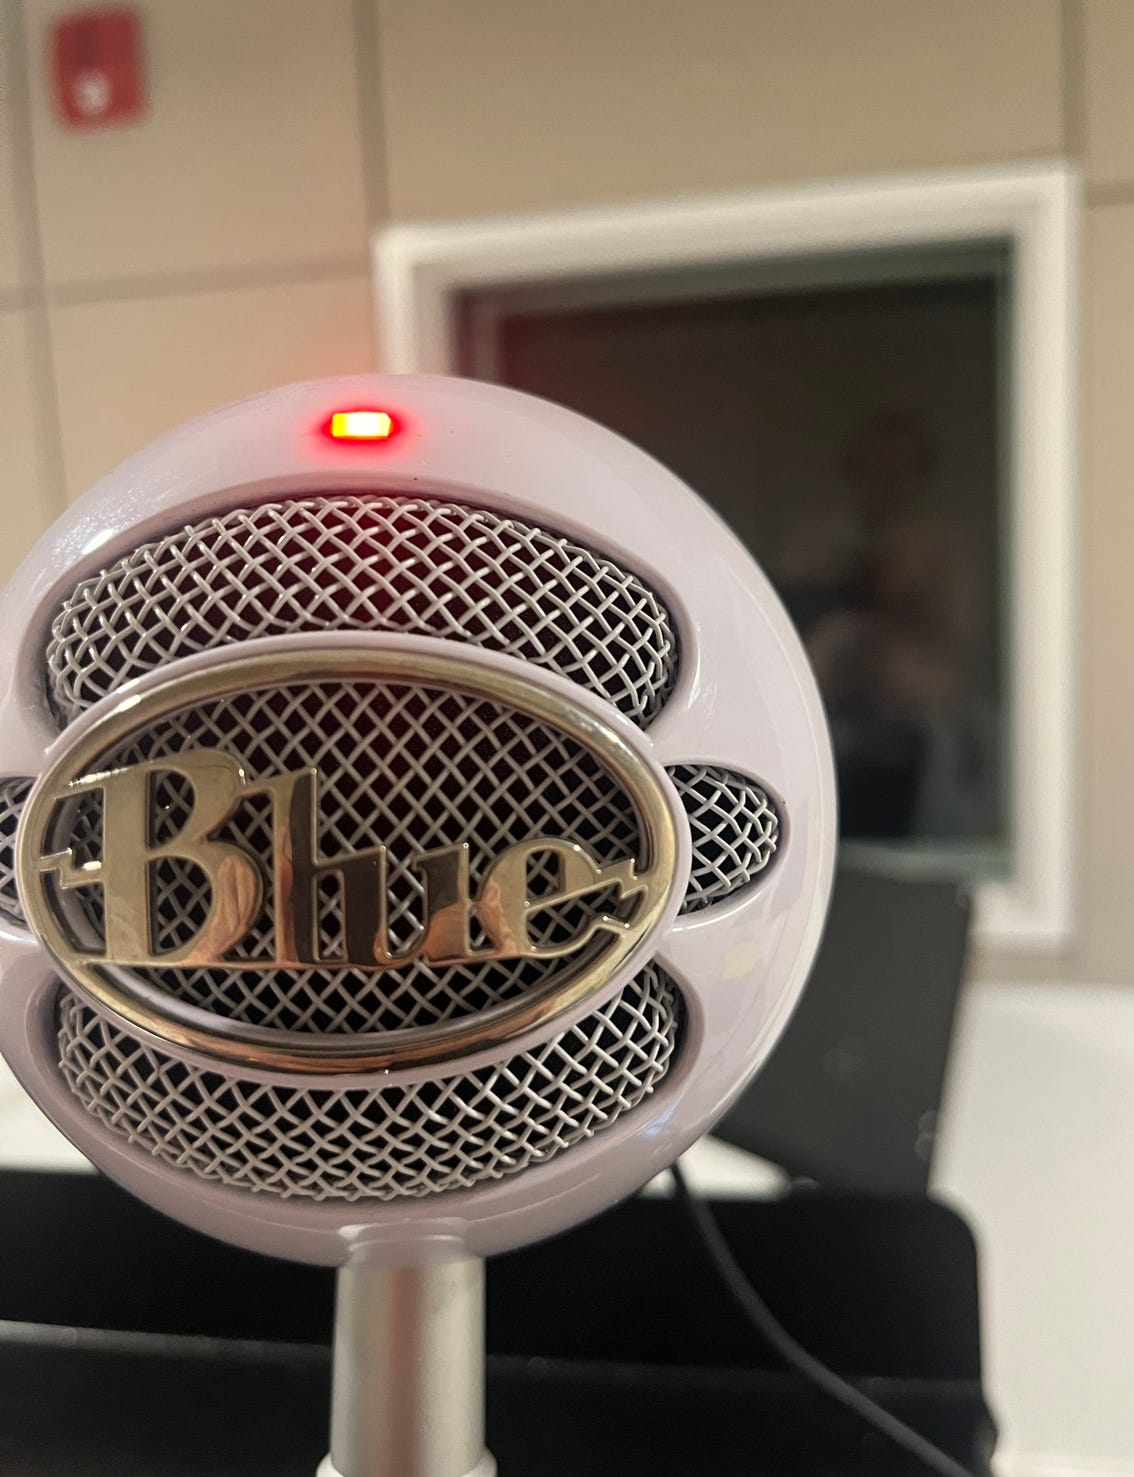 A modern-looking podcasting style microphone that is a round ball with a wire mesh on the front. A red light on the top indicates it's recording